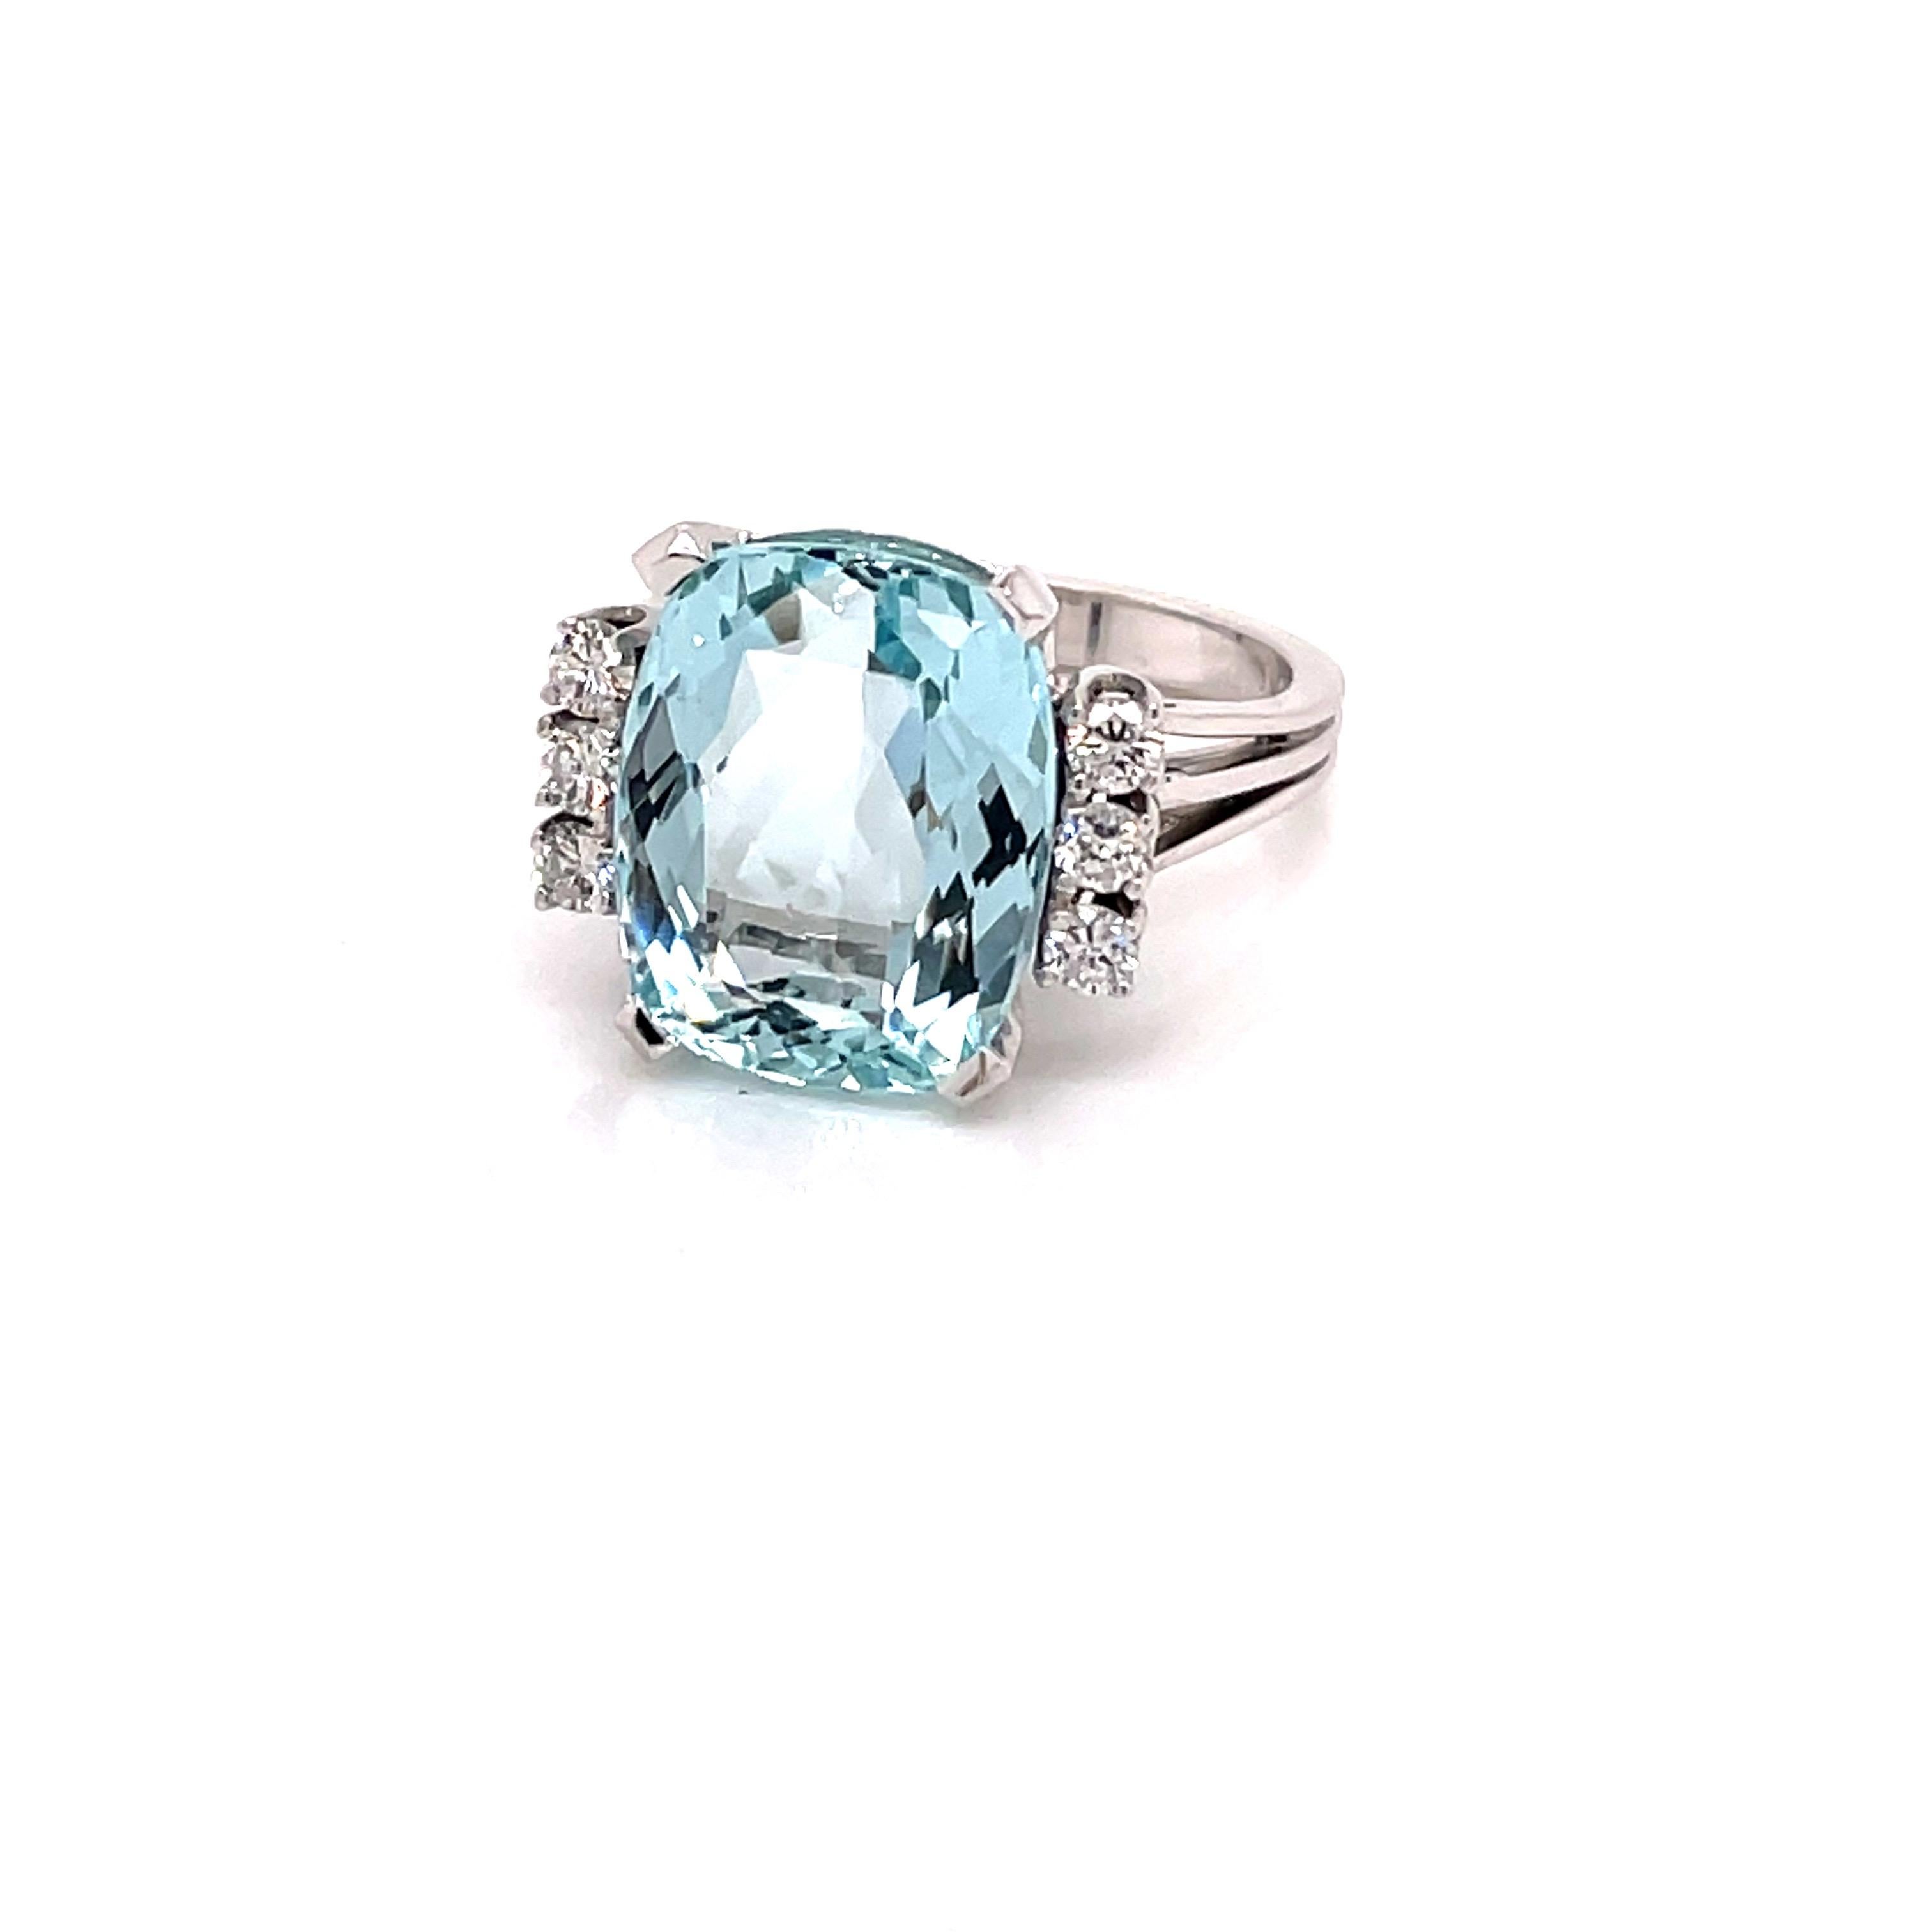 Contemporary Vintage 1960's 7.35ct Cushion Cut Aquamarine Ring with Diamonds For Sale